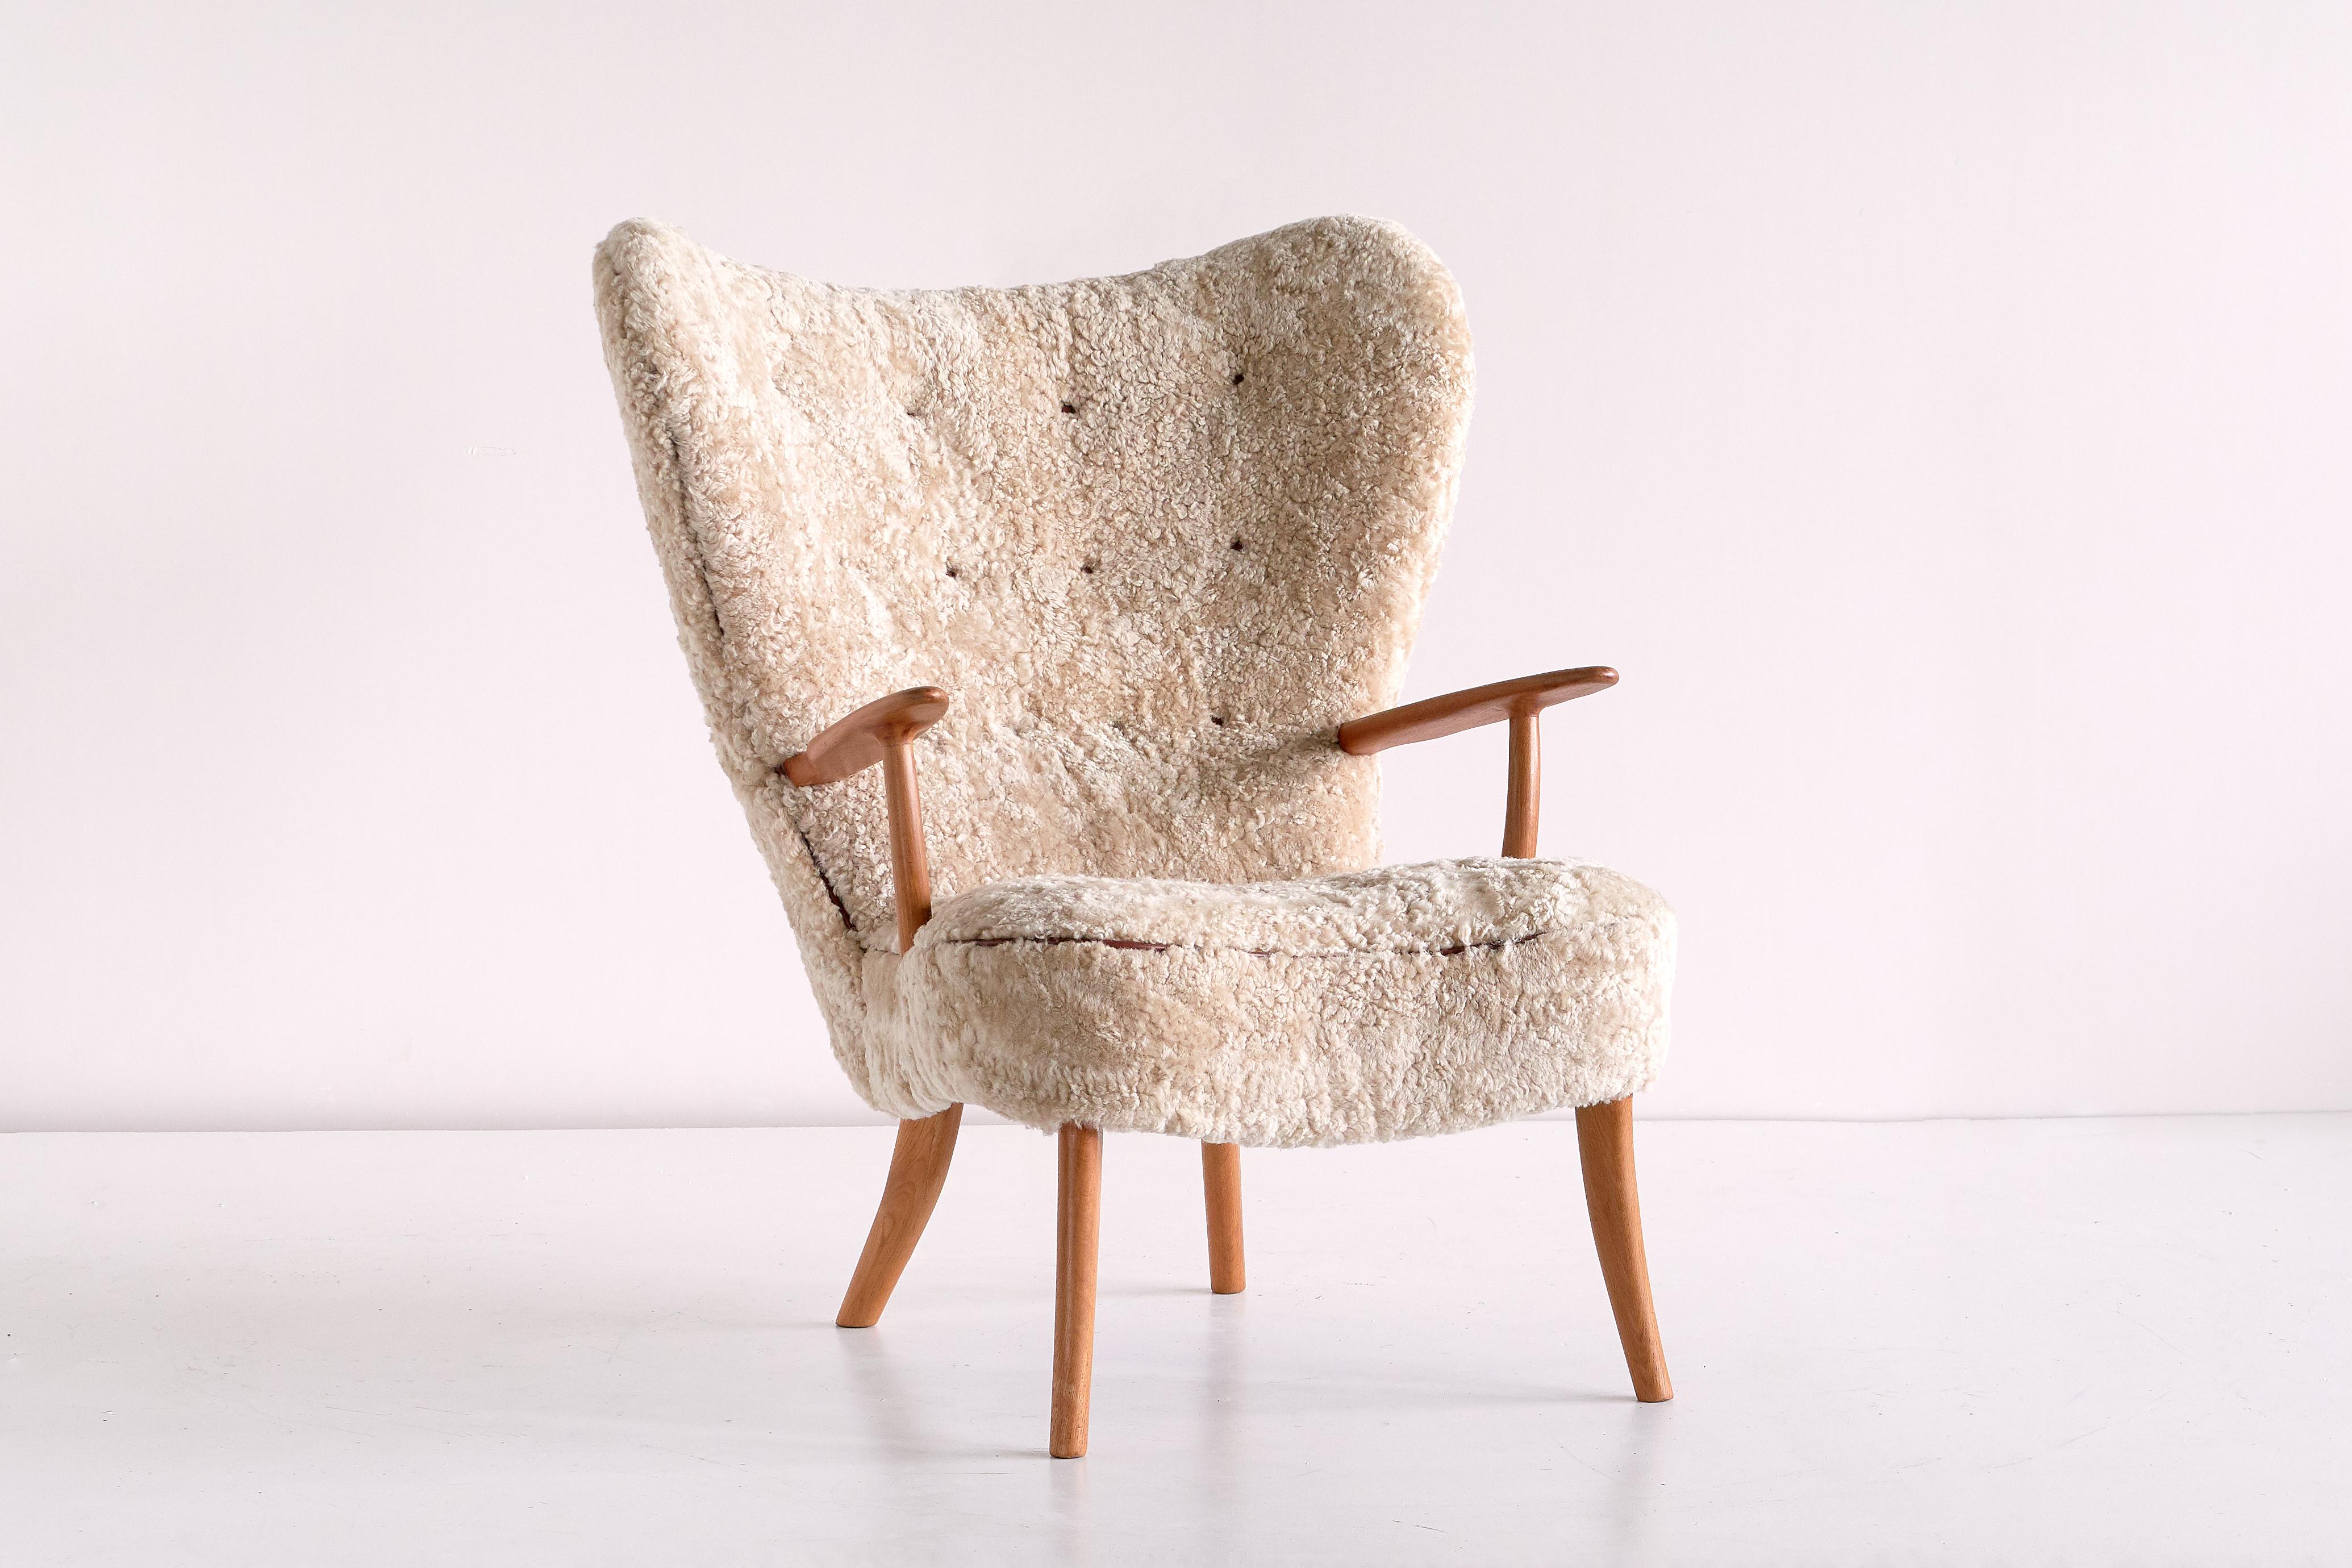 The rare 'Pragh' wingback chair was designed by Acton Schubell and Ib Madsen in the early 1950s. The generously sized chair has been fully reconditioned and newly upholstered in a sand colored, naturally curly and soft sheepskin. The high back and